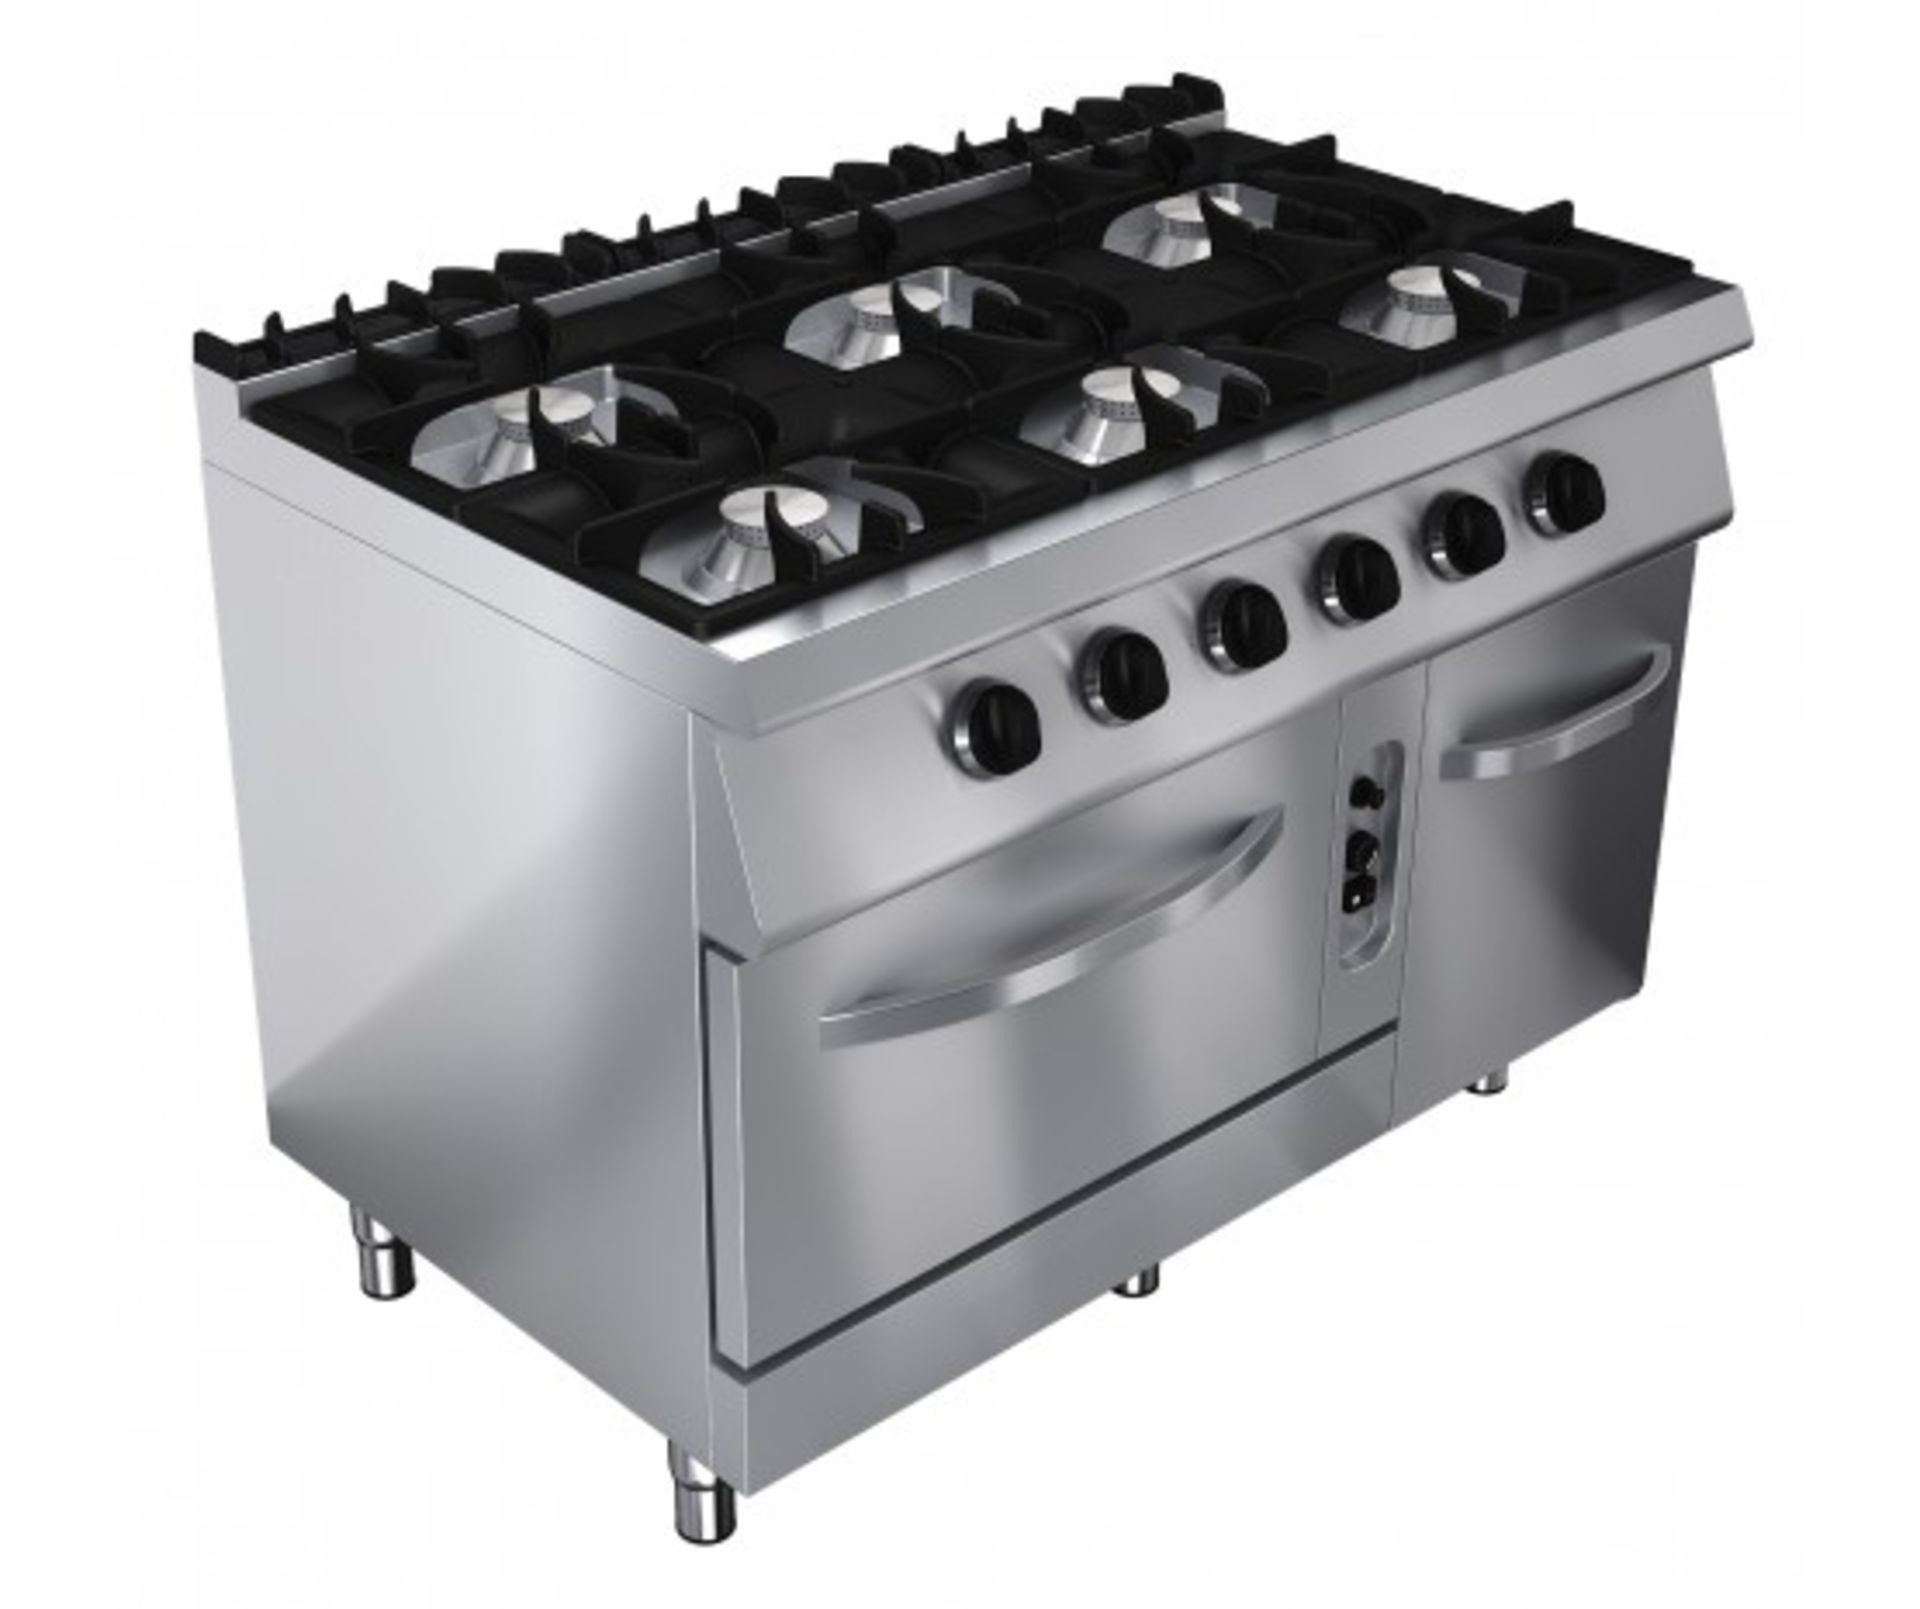 Gas oven range, 6 burners (one standard oven) - 45kW - 1200W x 730D x 900H - GAS - RG7K211